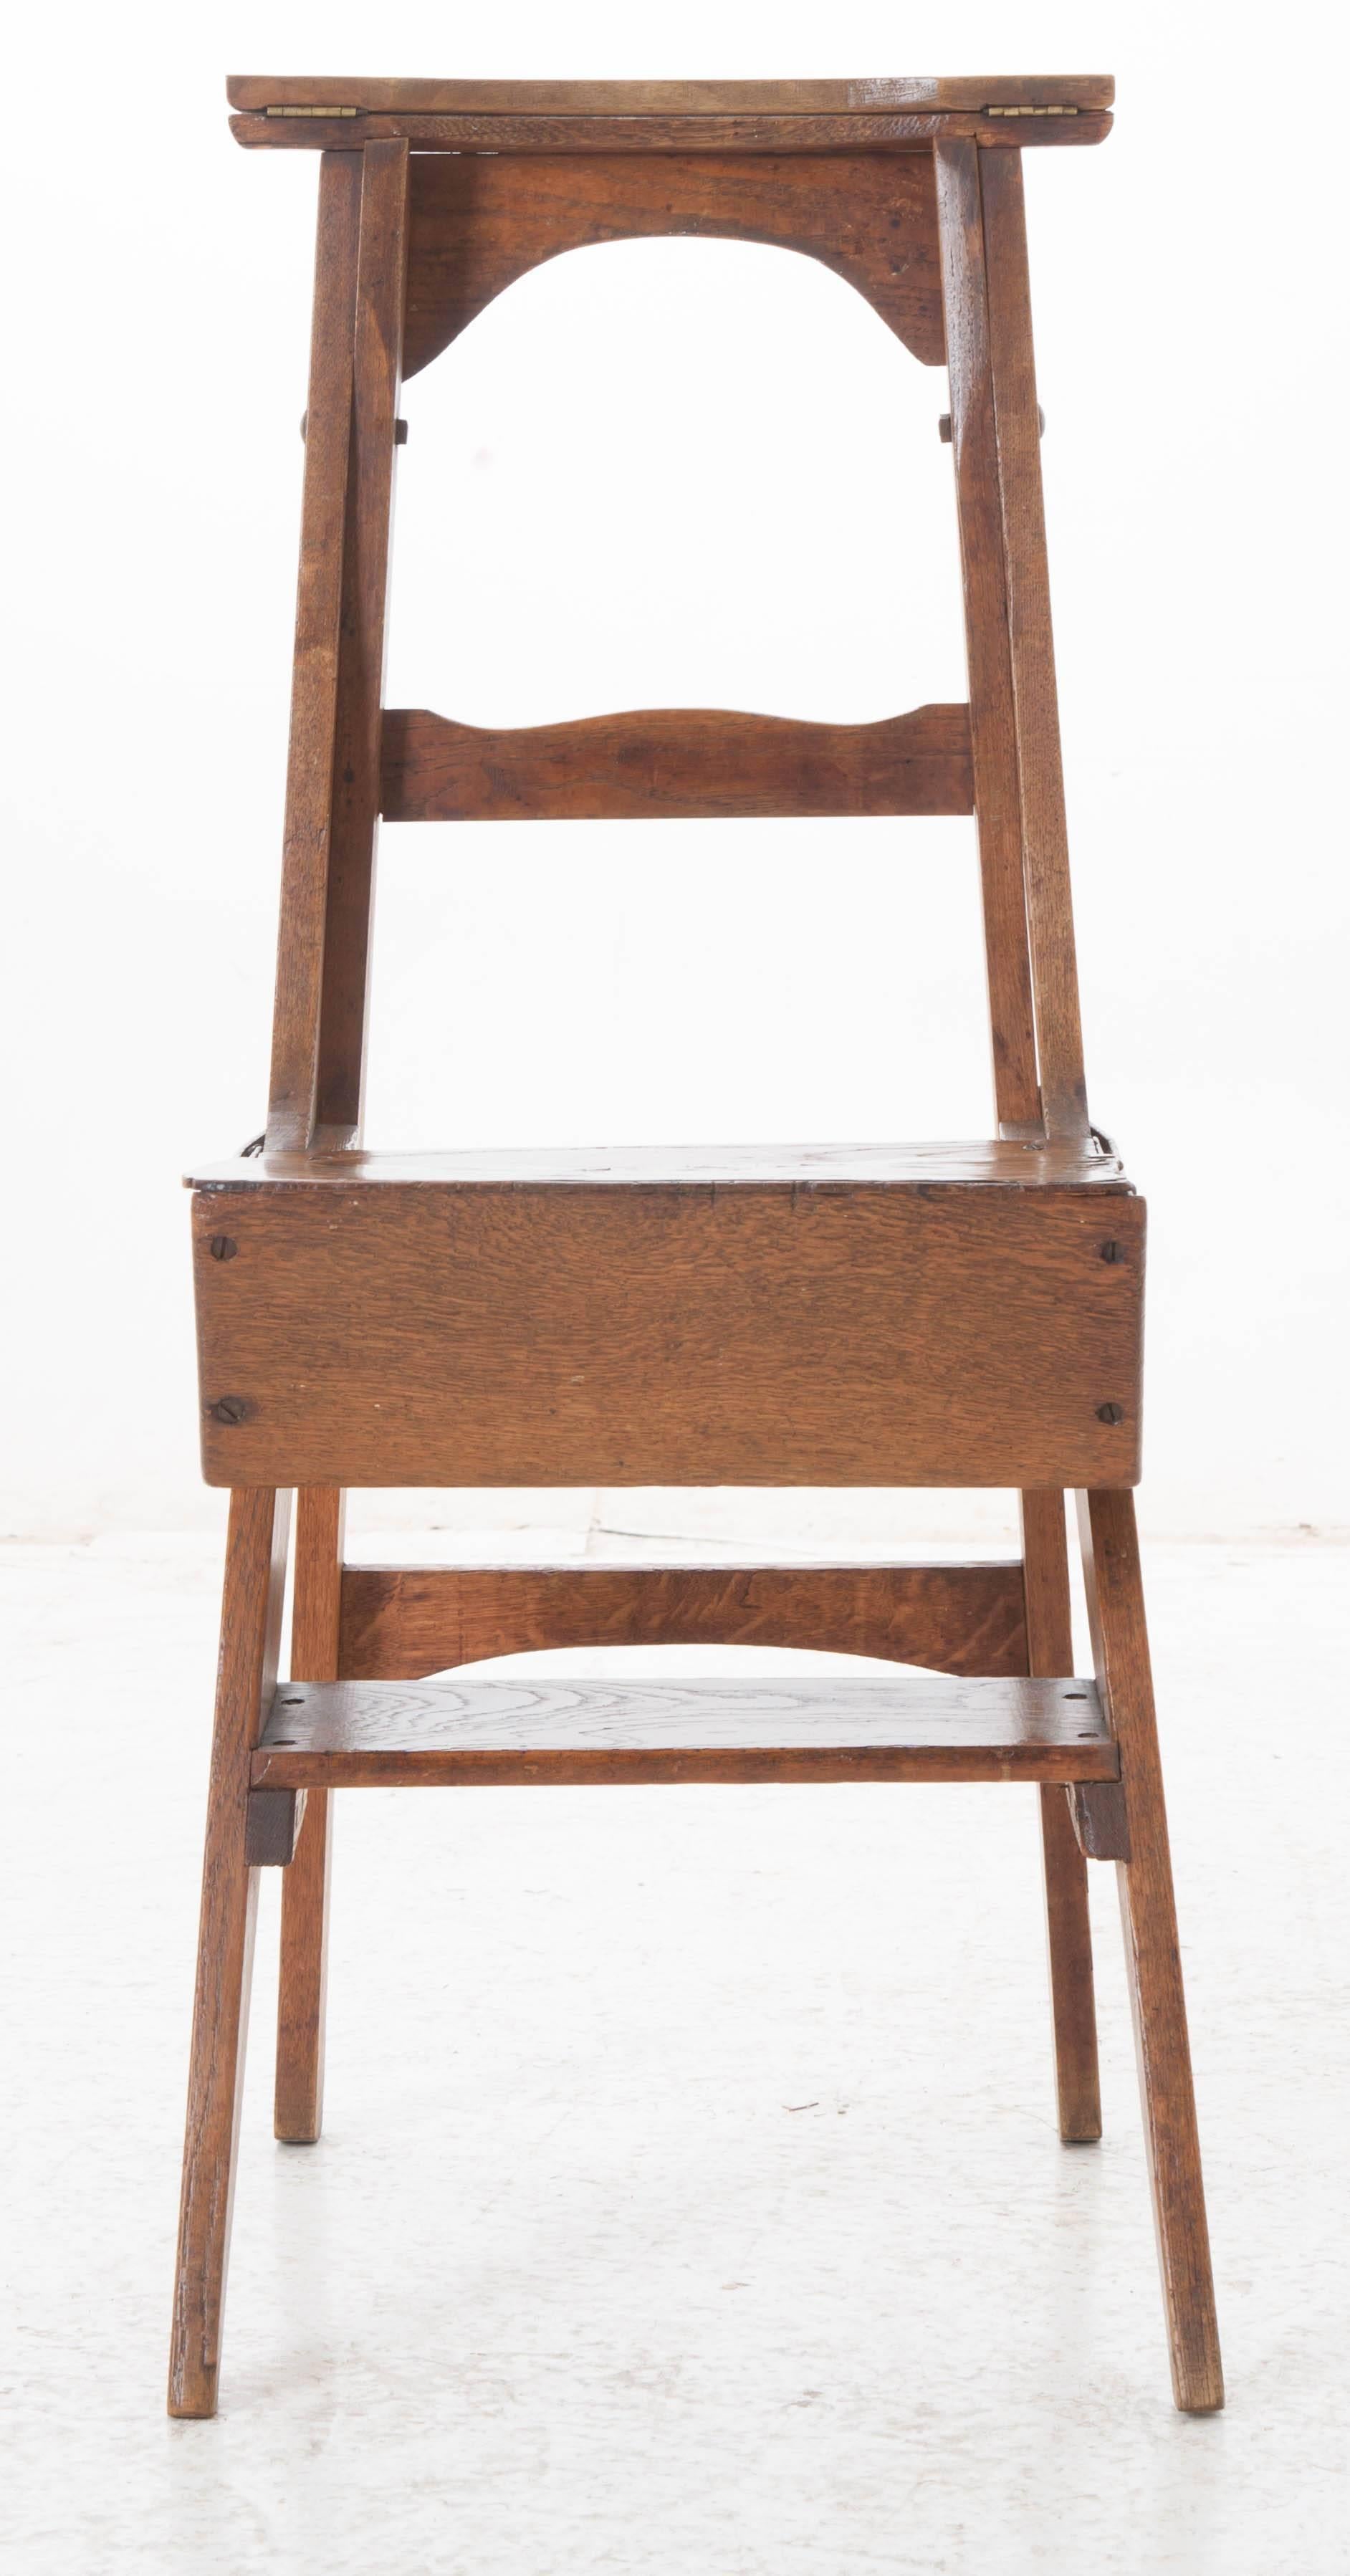 Ingeniously designed, this French oak piece doubles as both a step ladder and a chair. It can be easily configured to fulfill whichever use you have for it. The very top of the piece can be folded back to function as a more comfortable backrest, or